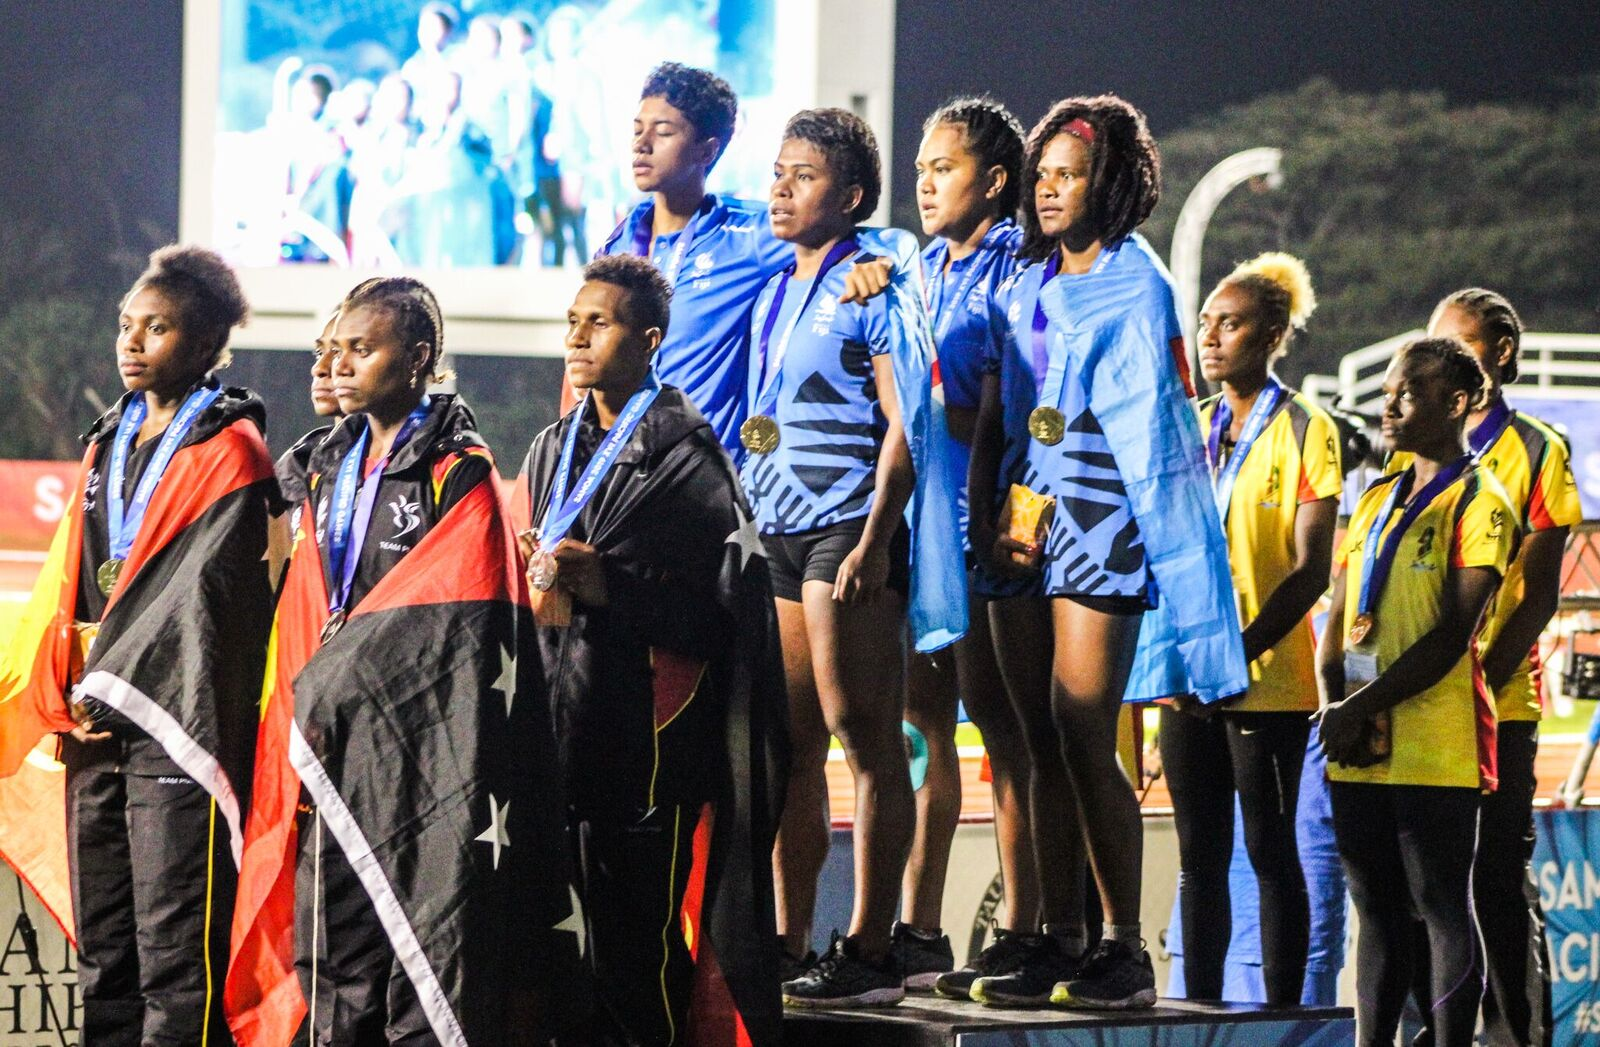 Fiji triumphed in both the men's and women's 4x100m relays ©Pacific Games News Service